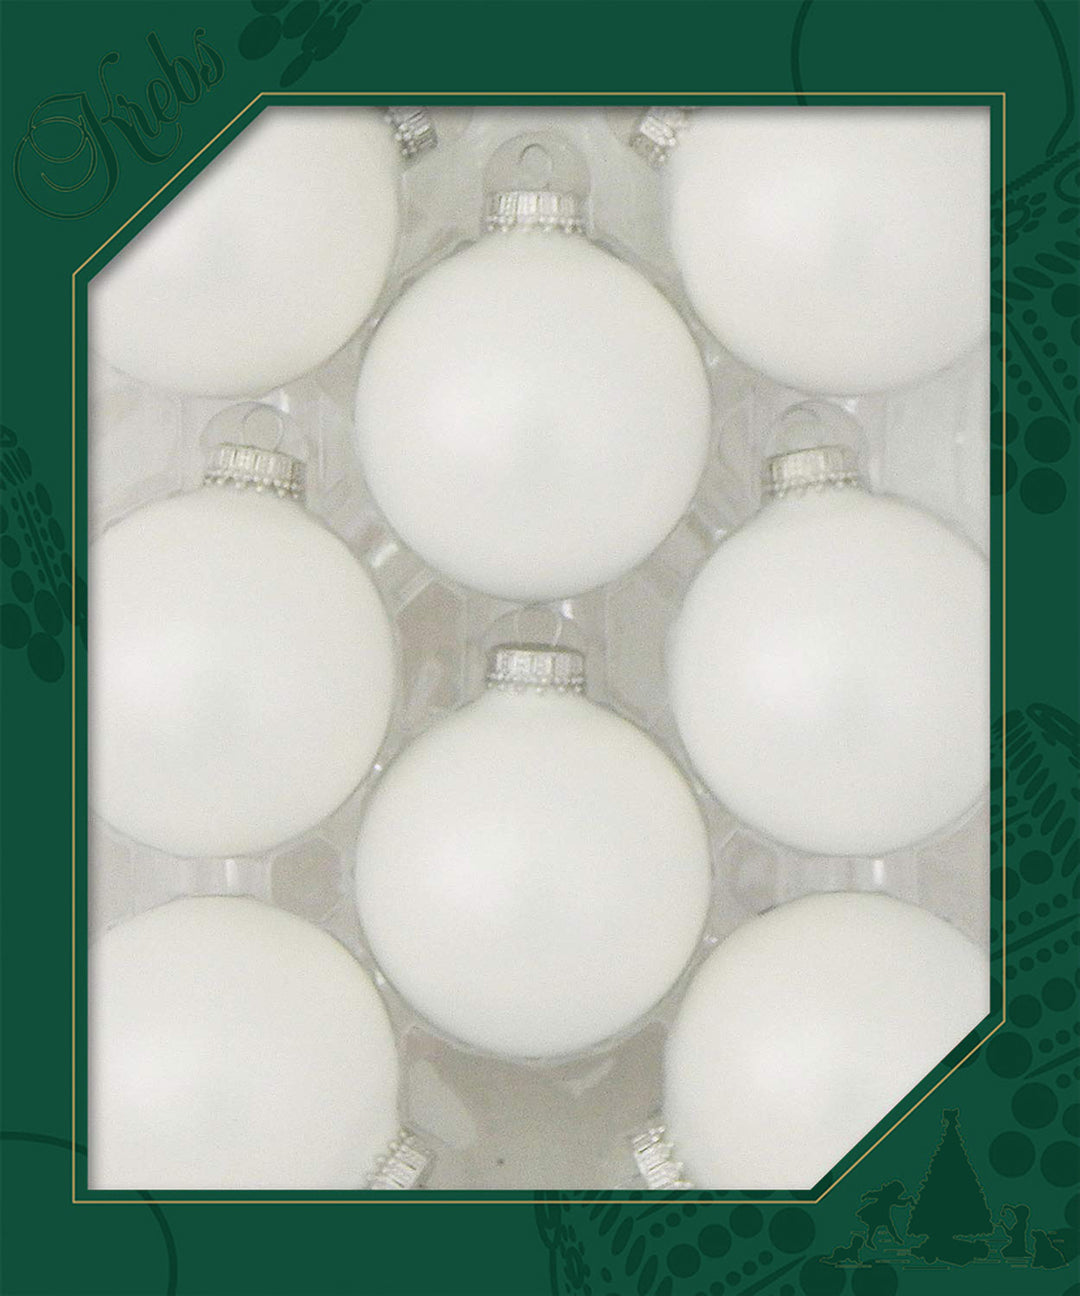 Glass Christmas Tree Ornaments - 67mm / 2.63" [8 Pieces] Designer Balls from Christmas By Krebs Seamless Hanging Holiday Decor (White Satin)